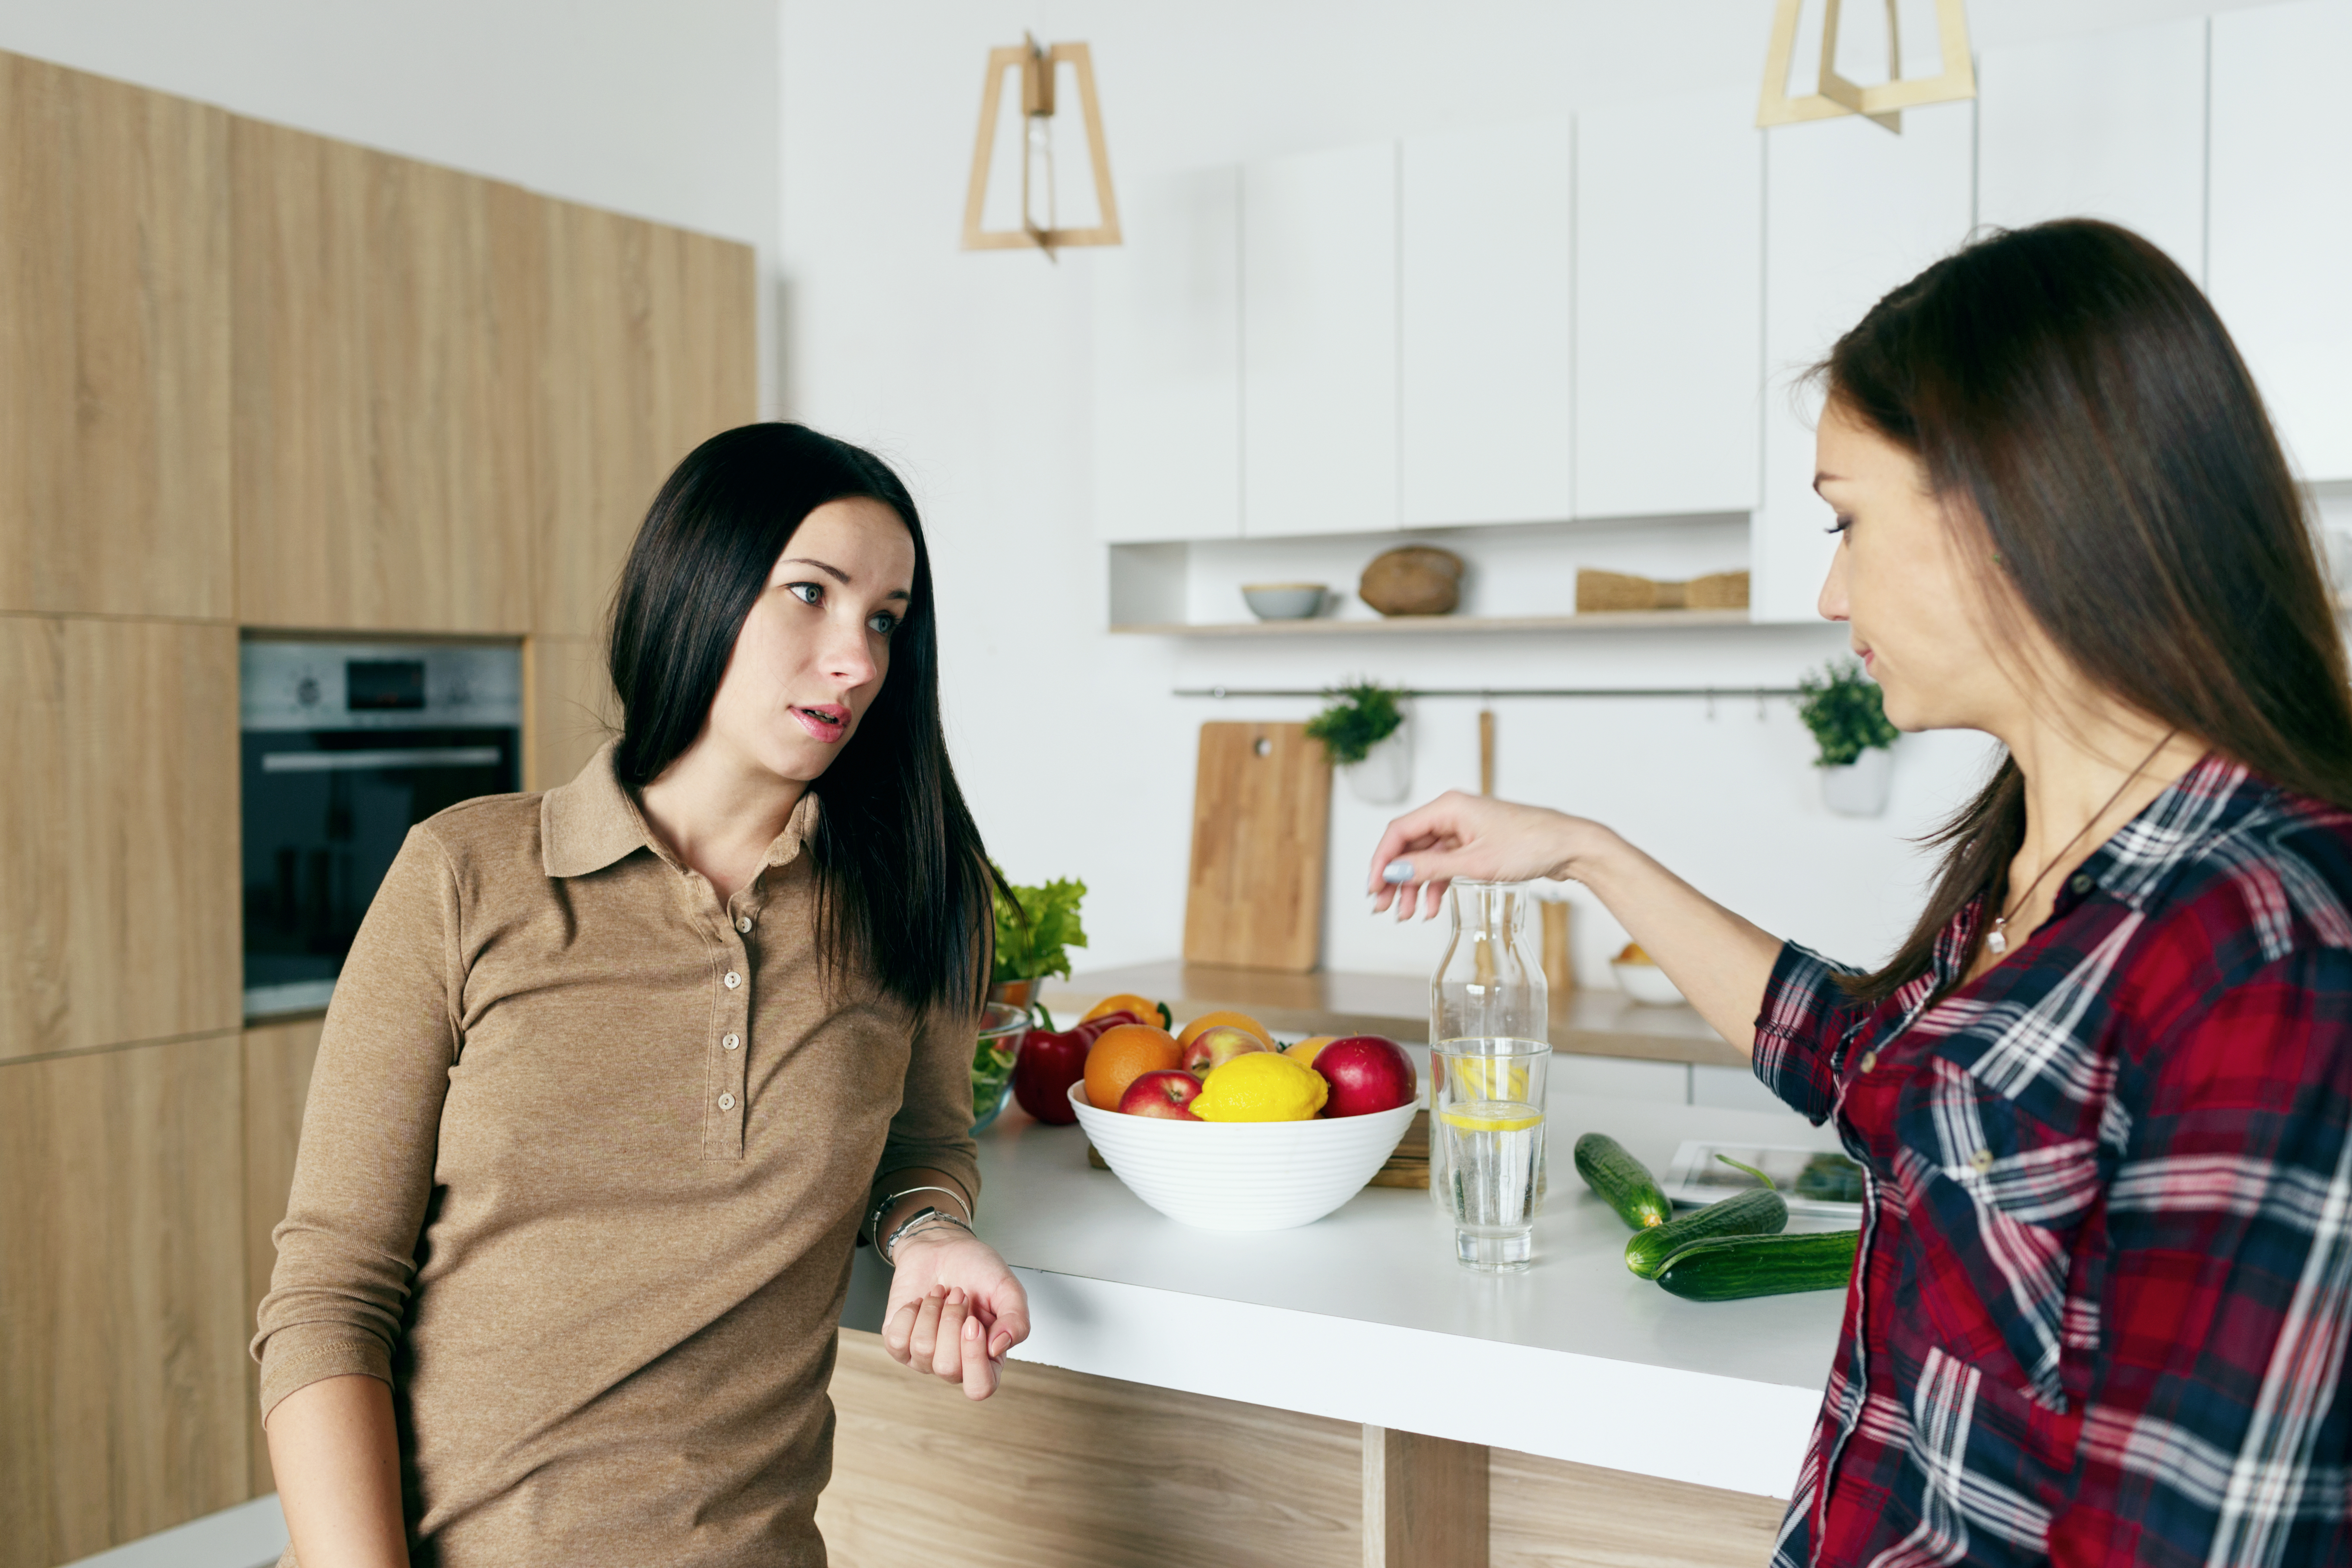 Two women having a conversation in the kitchen | Source: Shutterstock